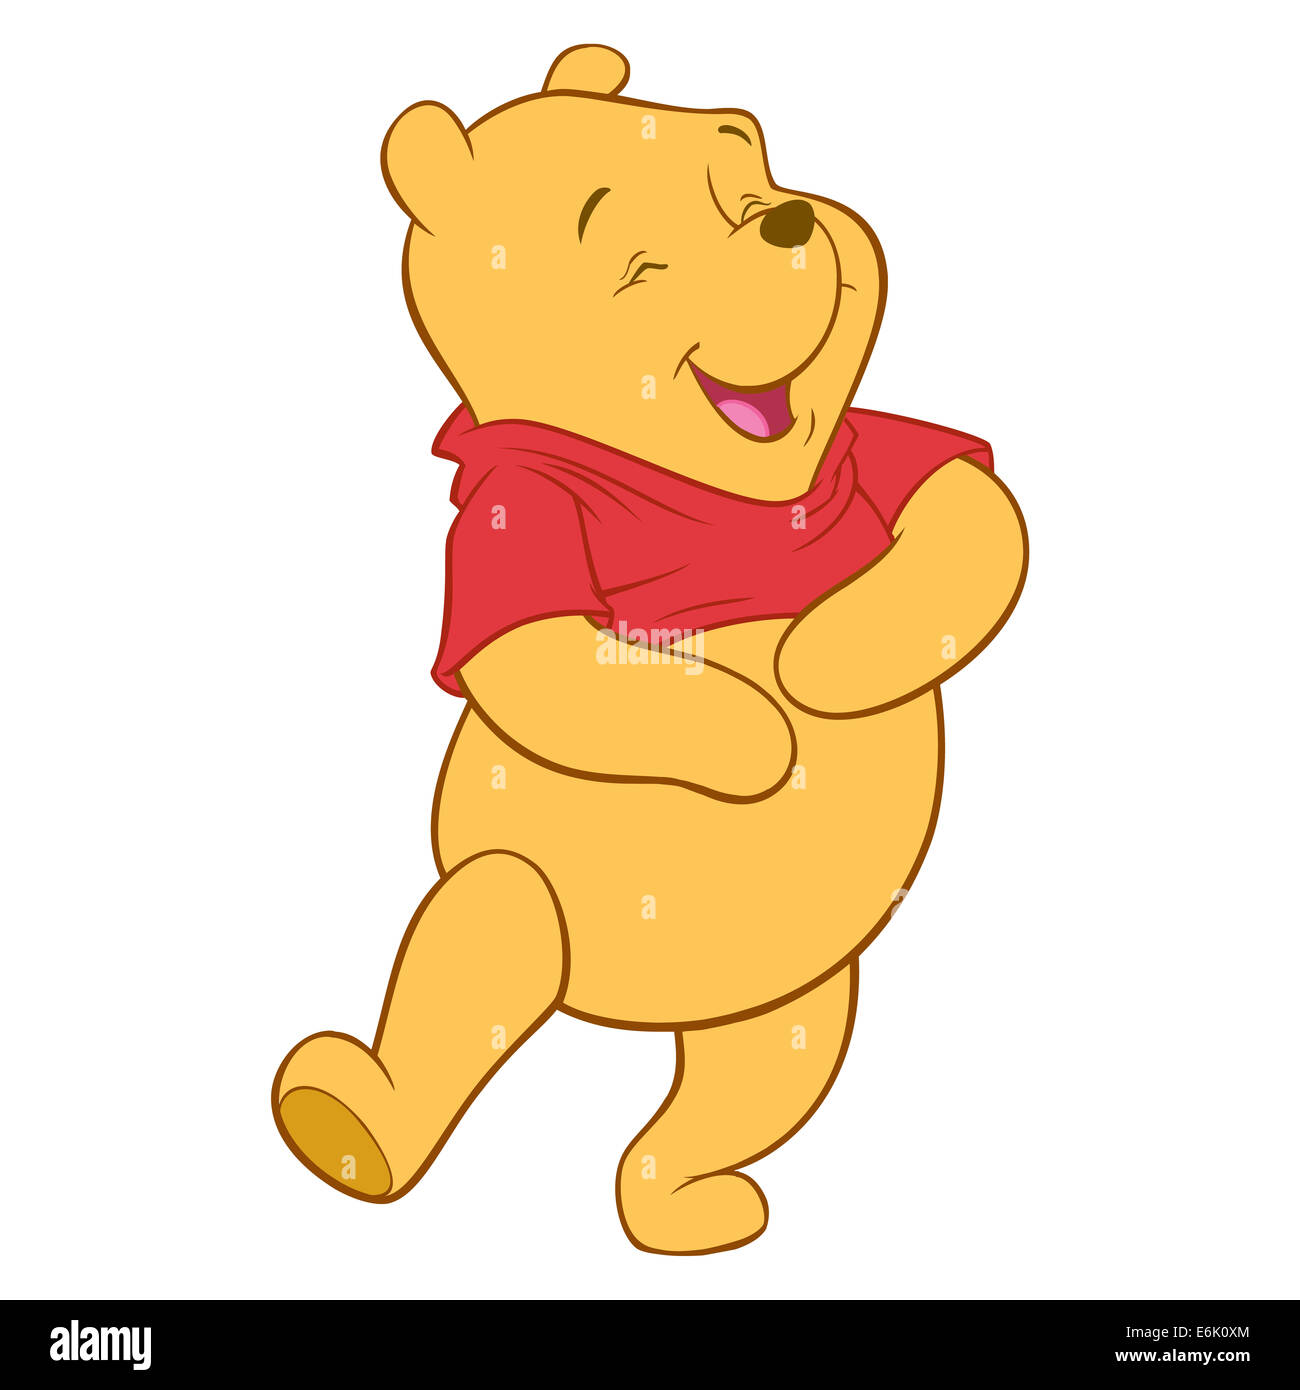 Winnie the pooh Cut Out Stock Images & Pictures - Alamy